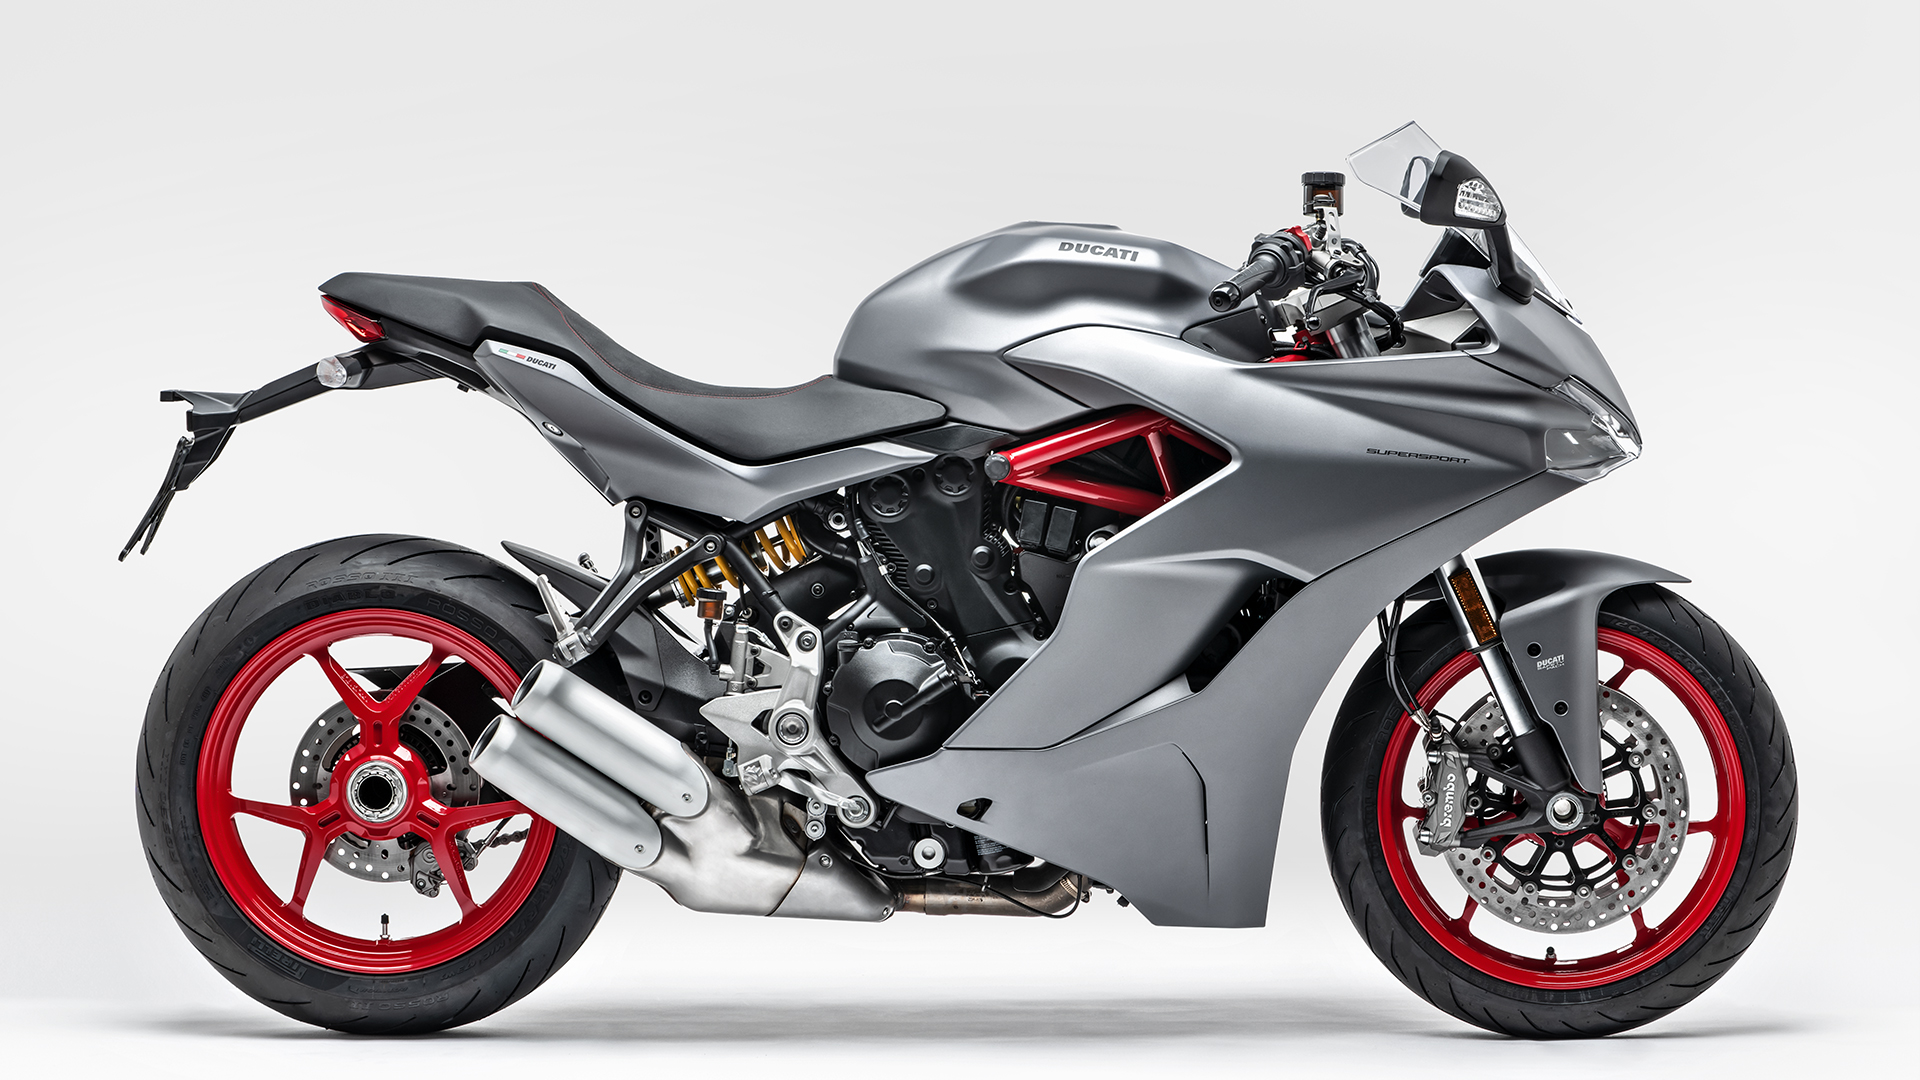 New Colour for Ducati Supersport - Motorcycle news, Motorcycle reviews ...